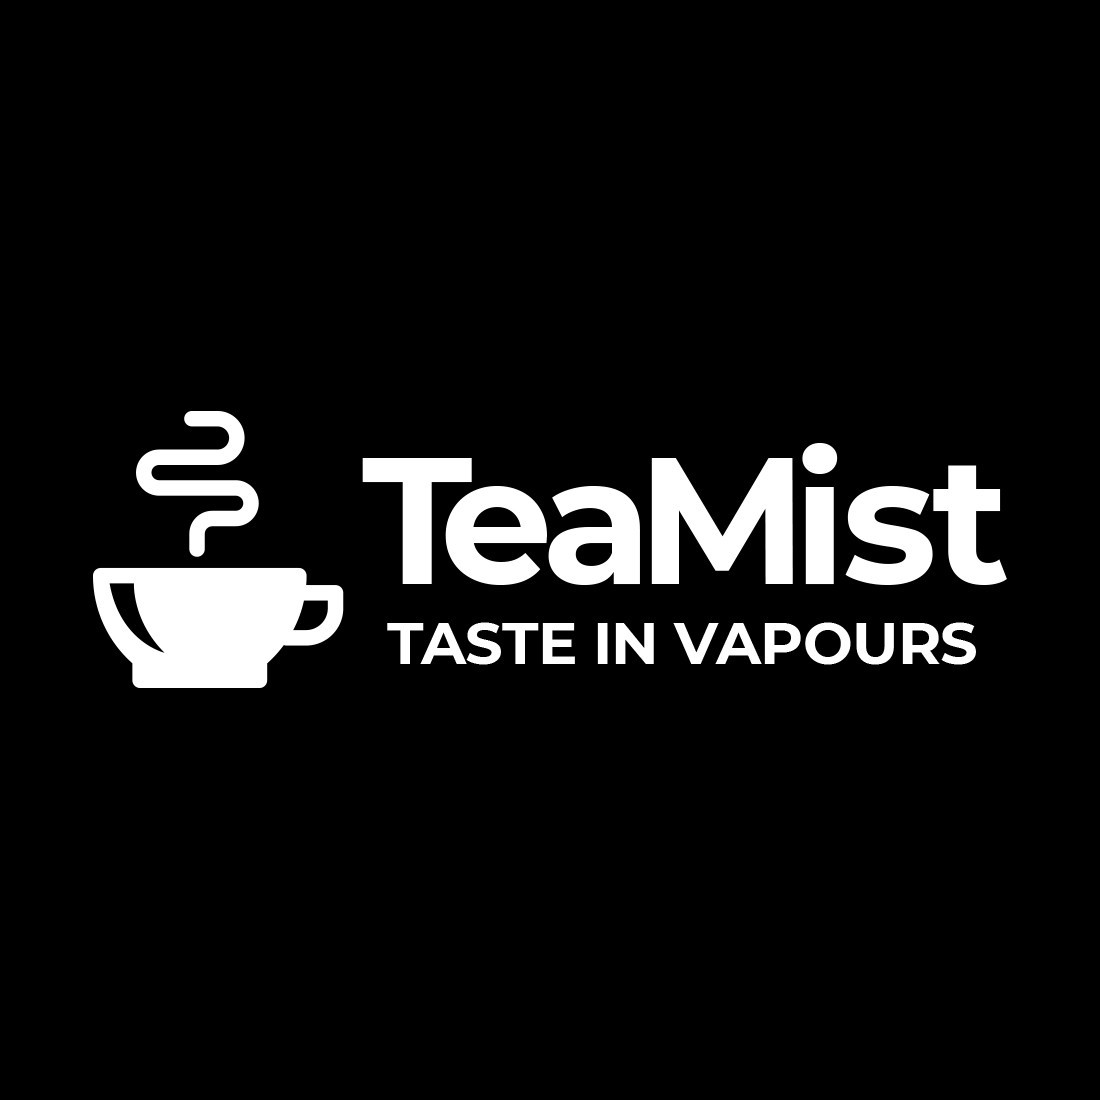 Simple black background with the white tea logo.